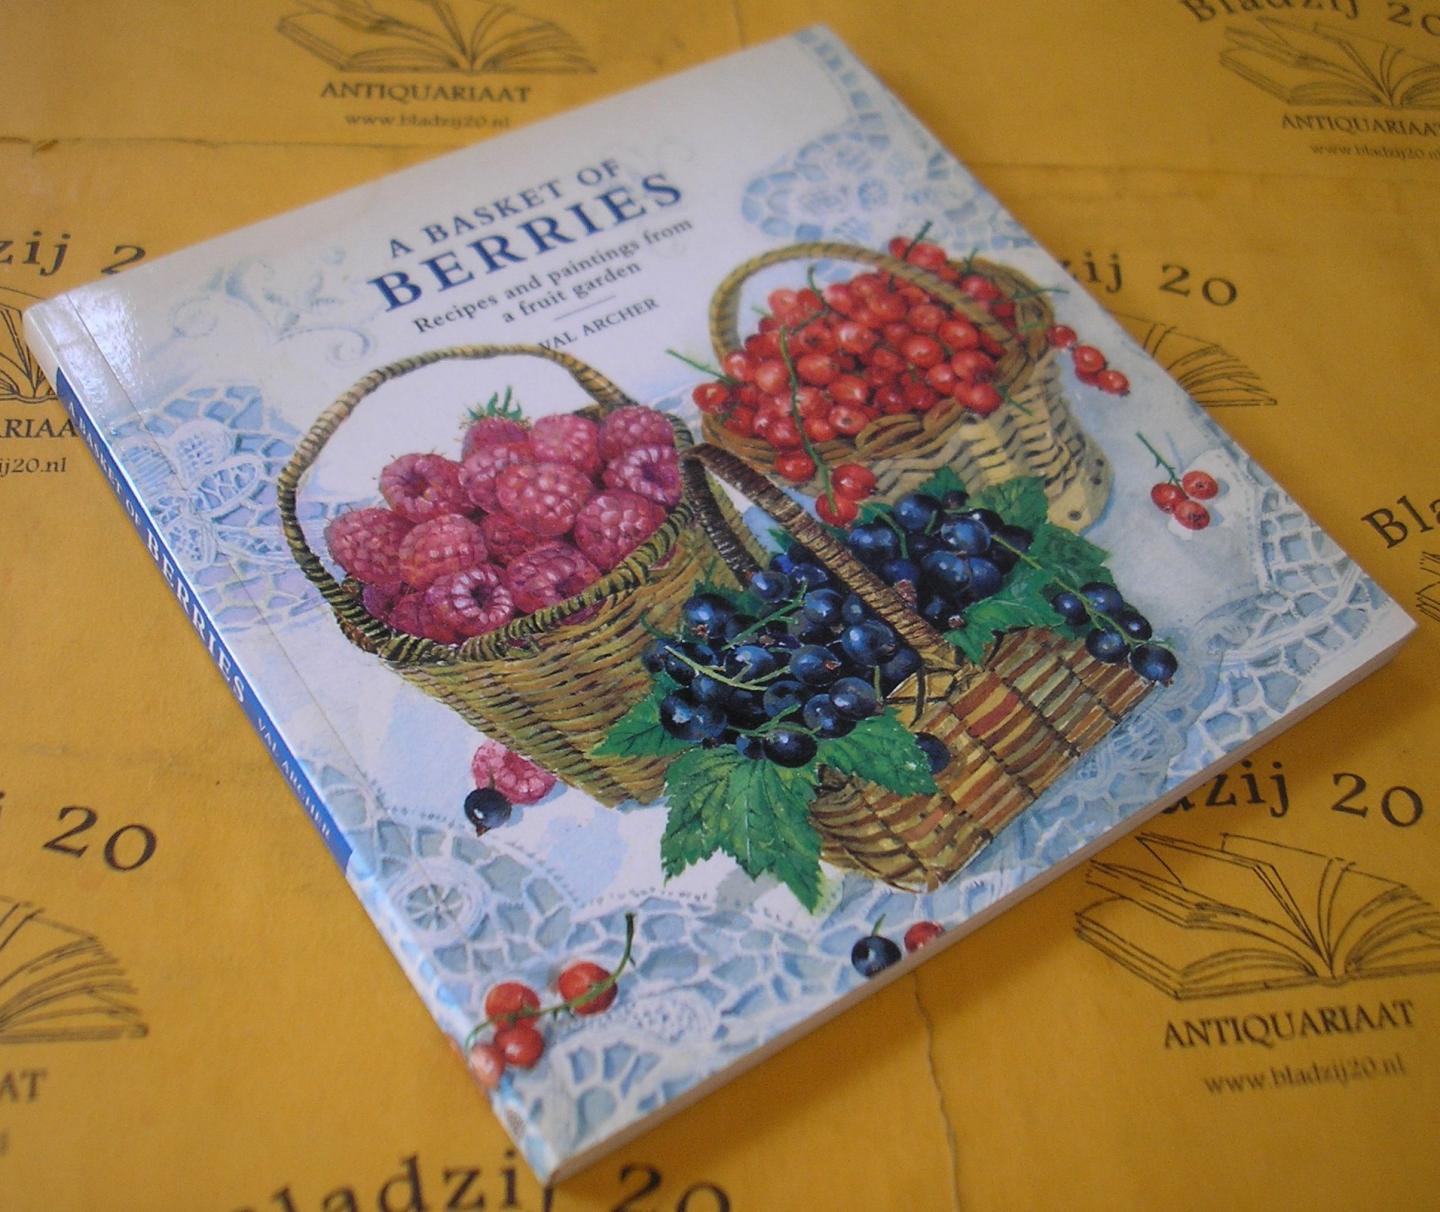 Archer, Val. - A basket of berries. Recipes and paintings from a fruit garden.